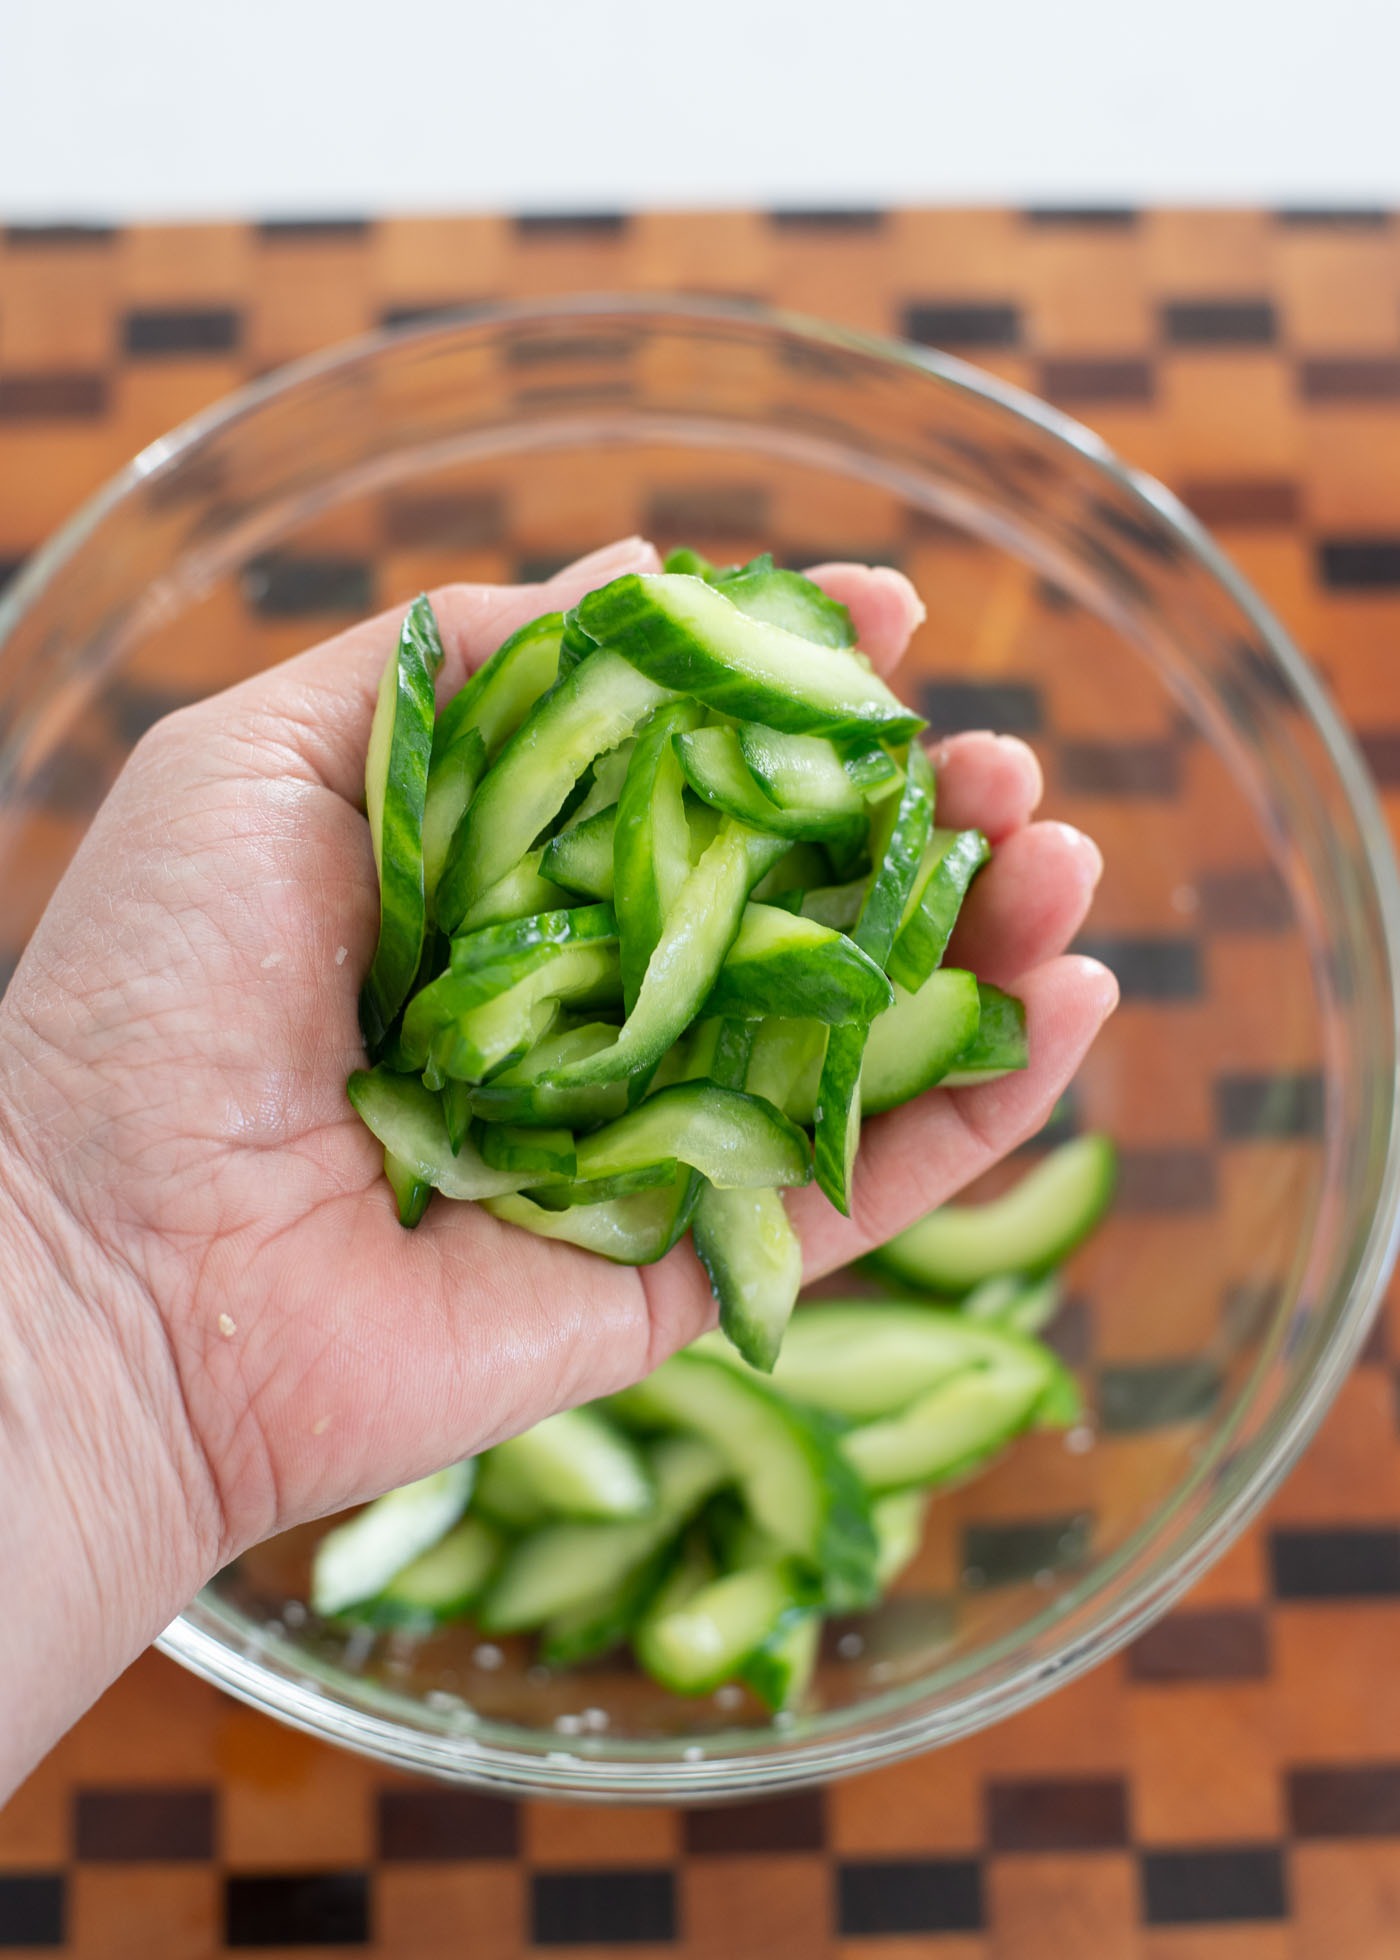 Salted cucumber slices are being squeezed out in hand to remove moisture.